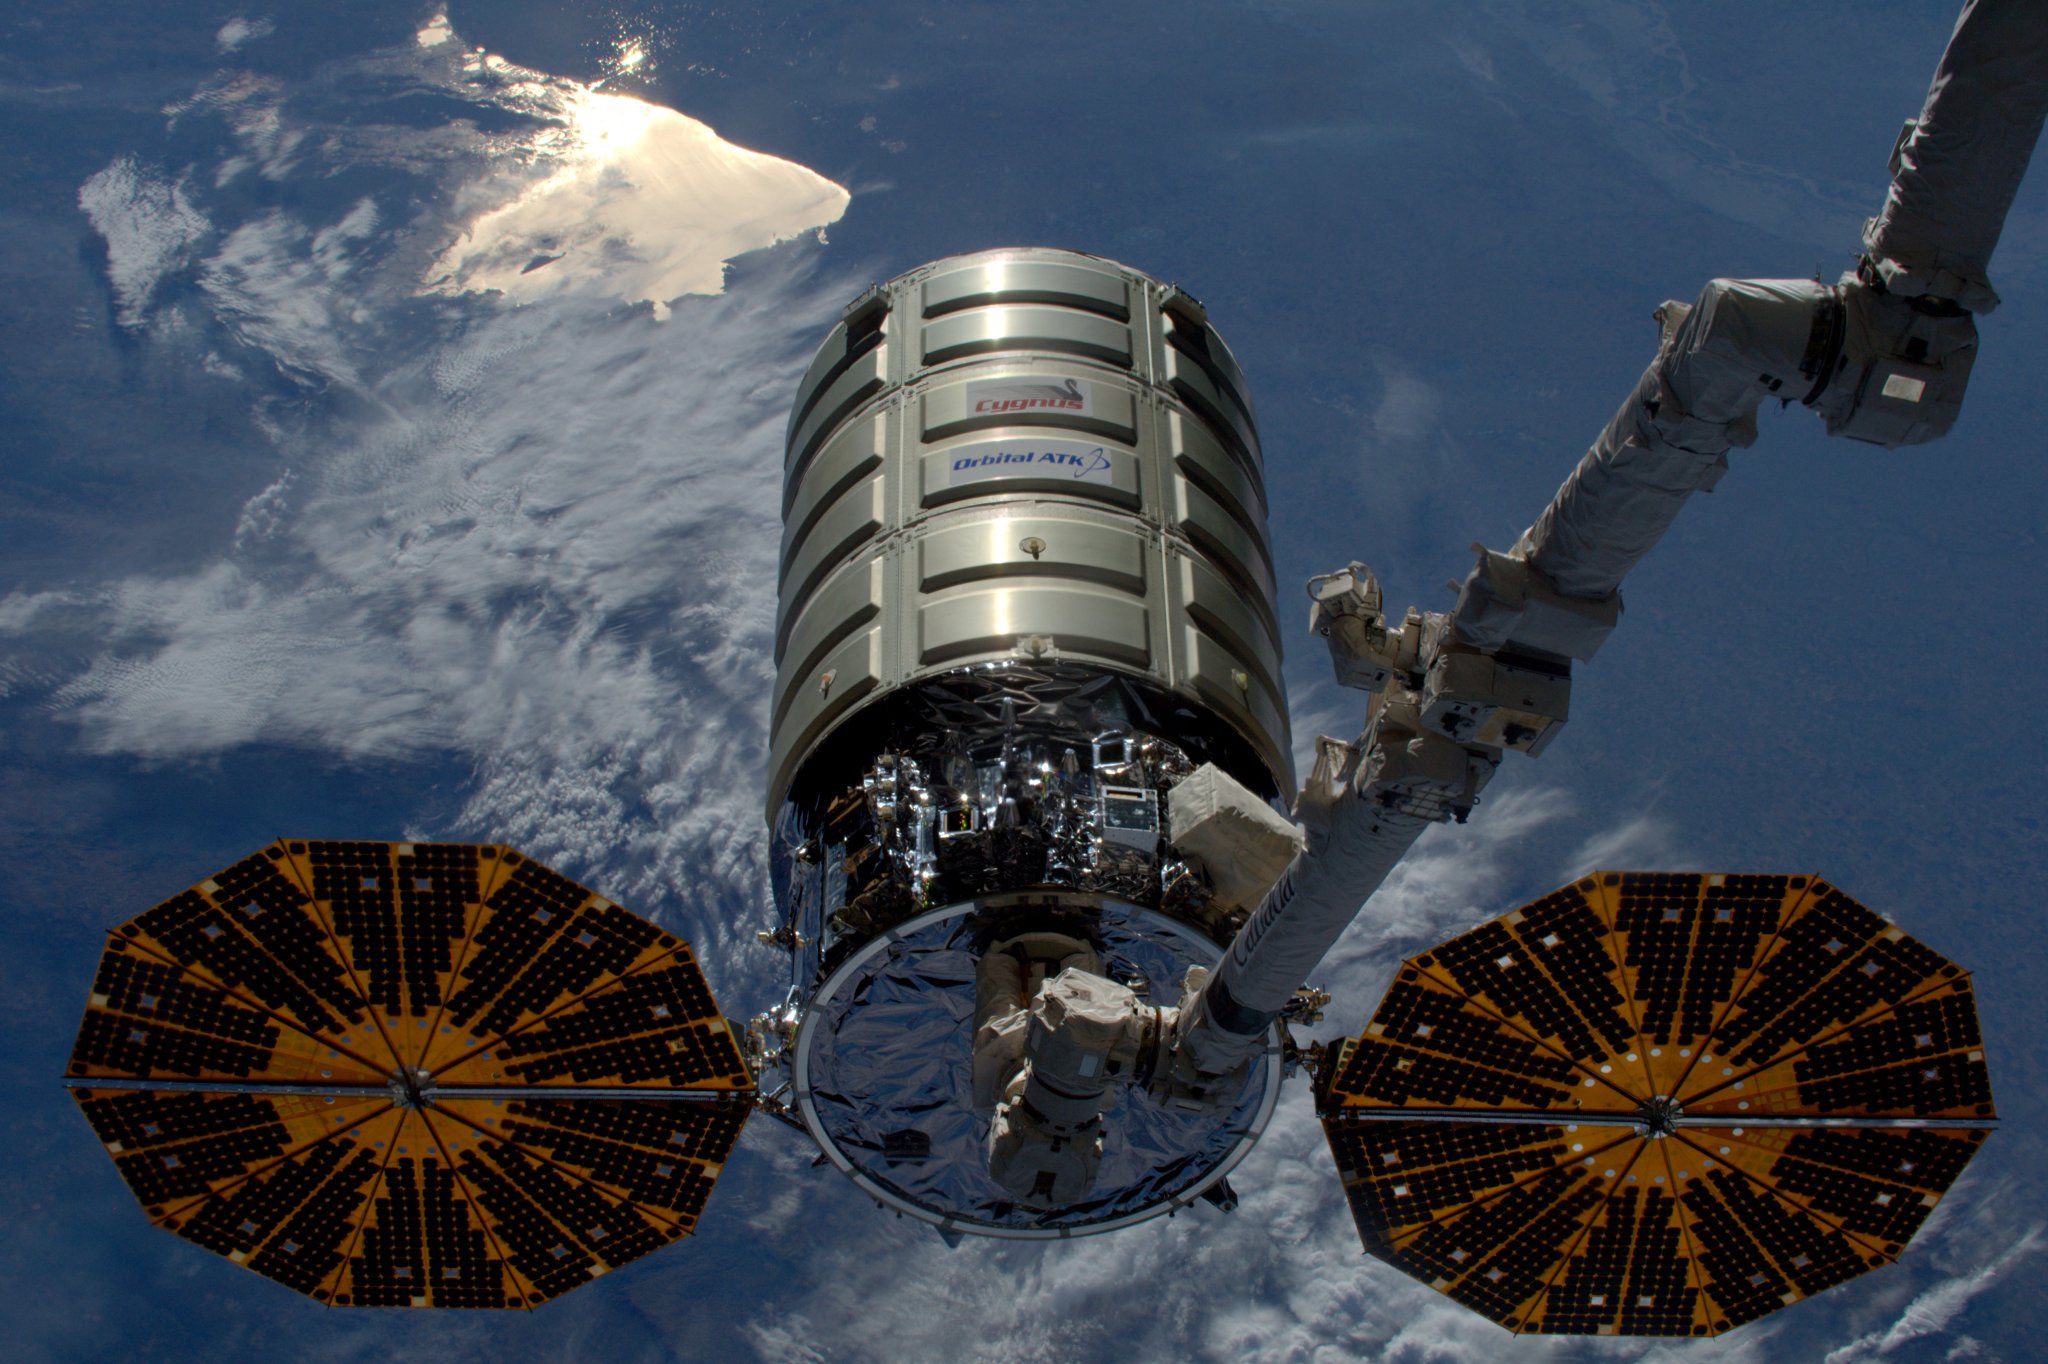 Cygnus spacecraft and robotic arm of space station closeup with Earth visible below